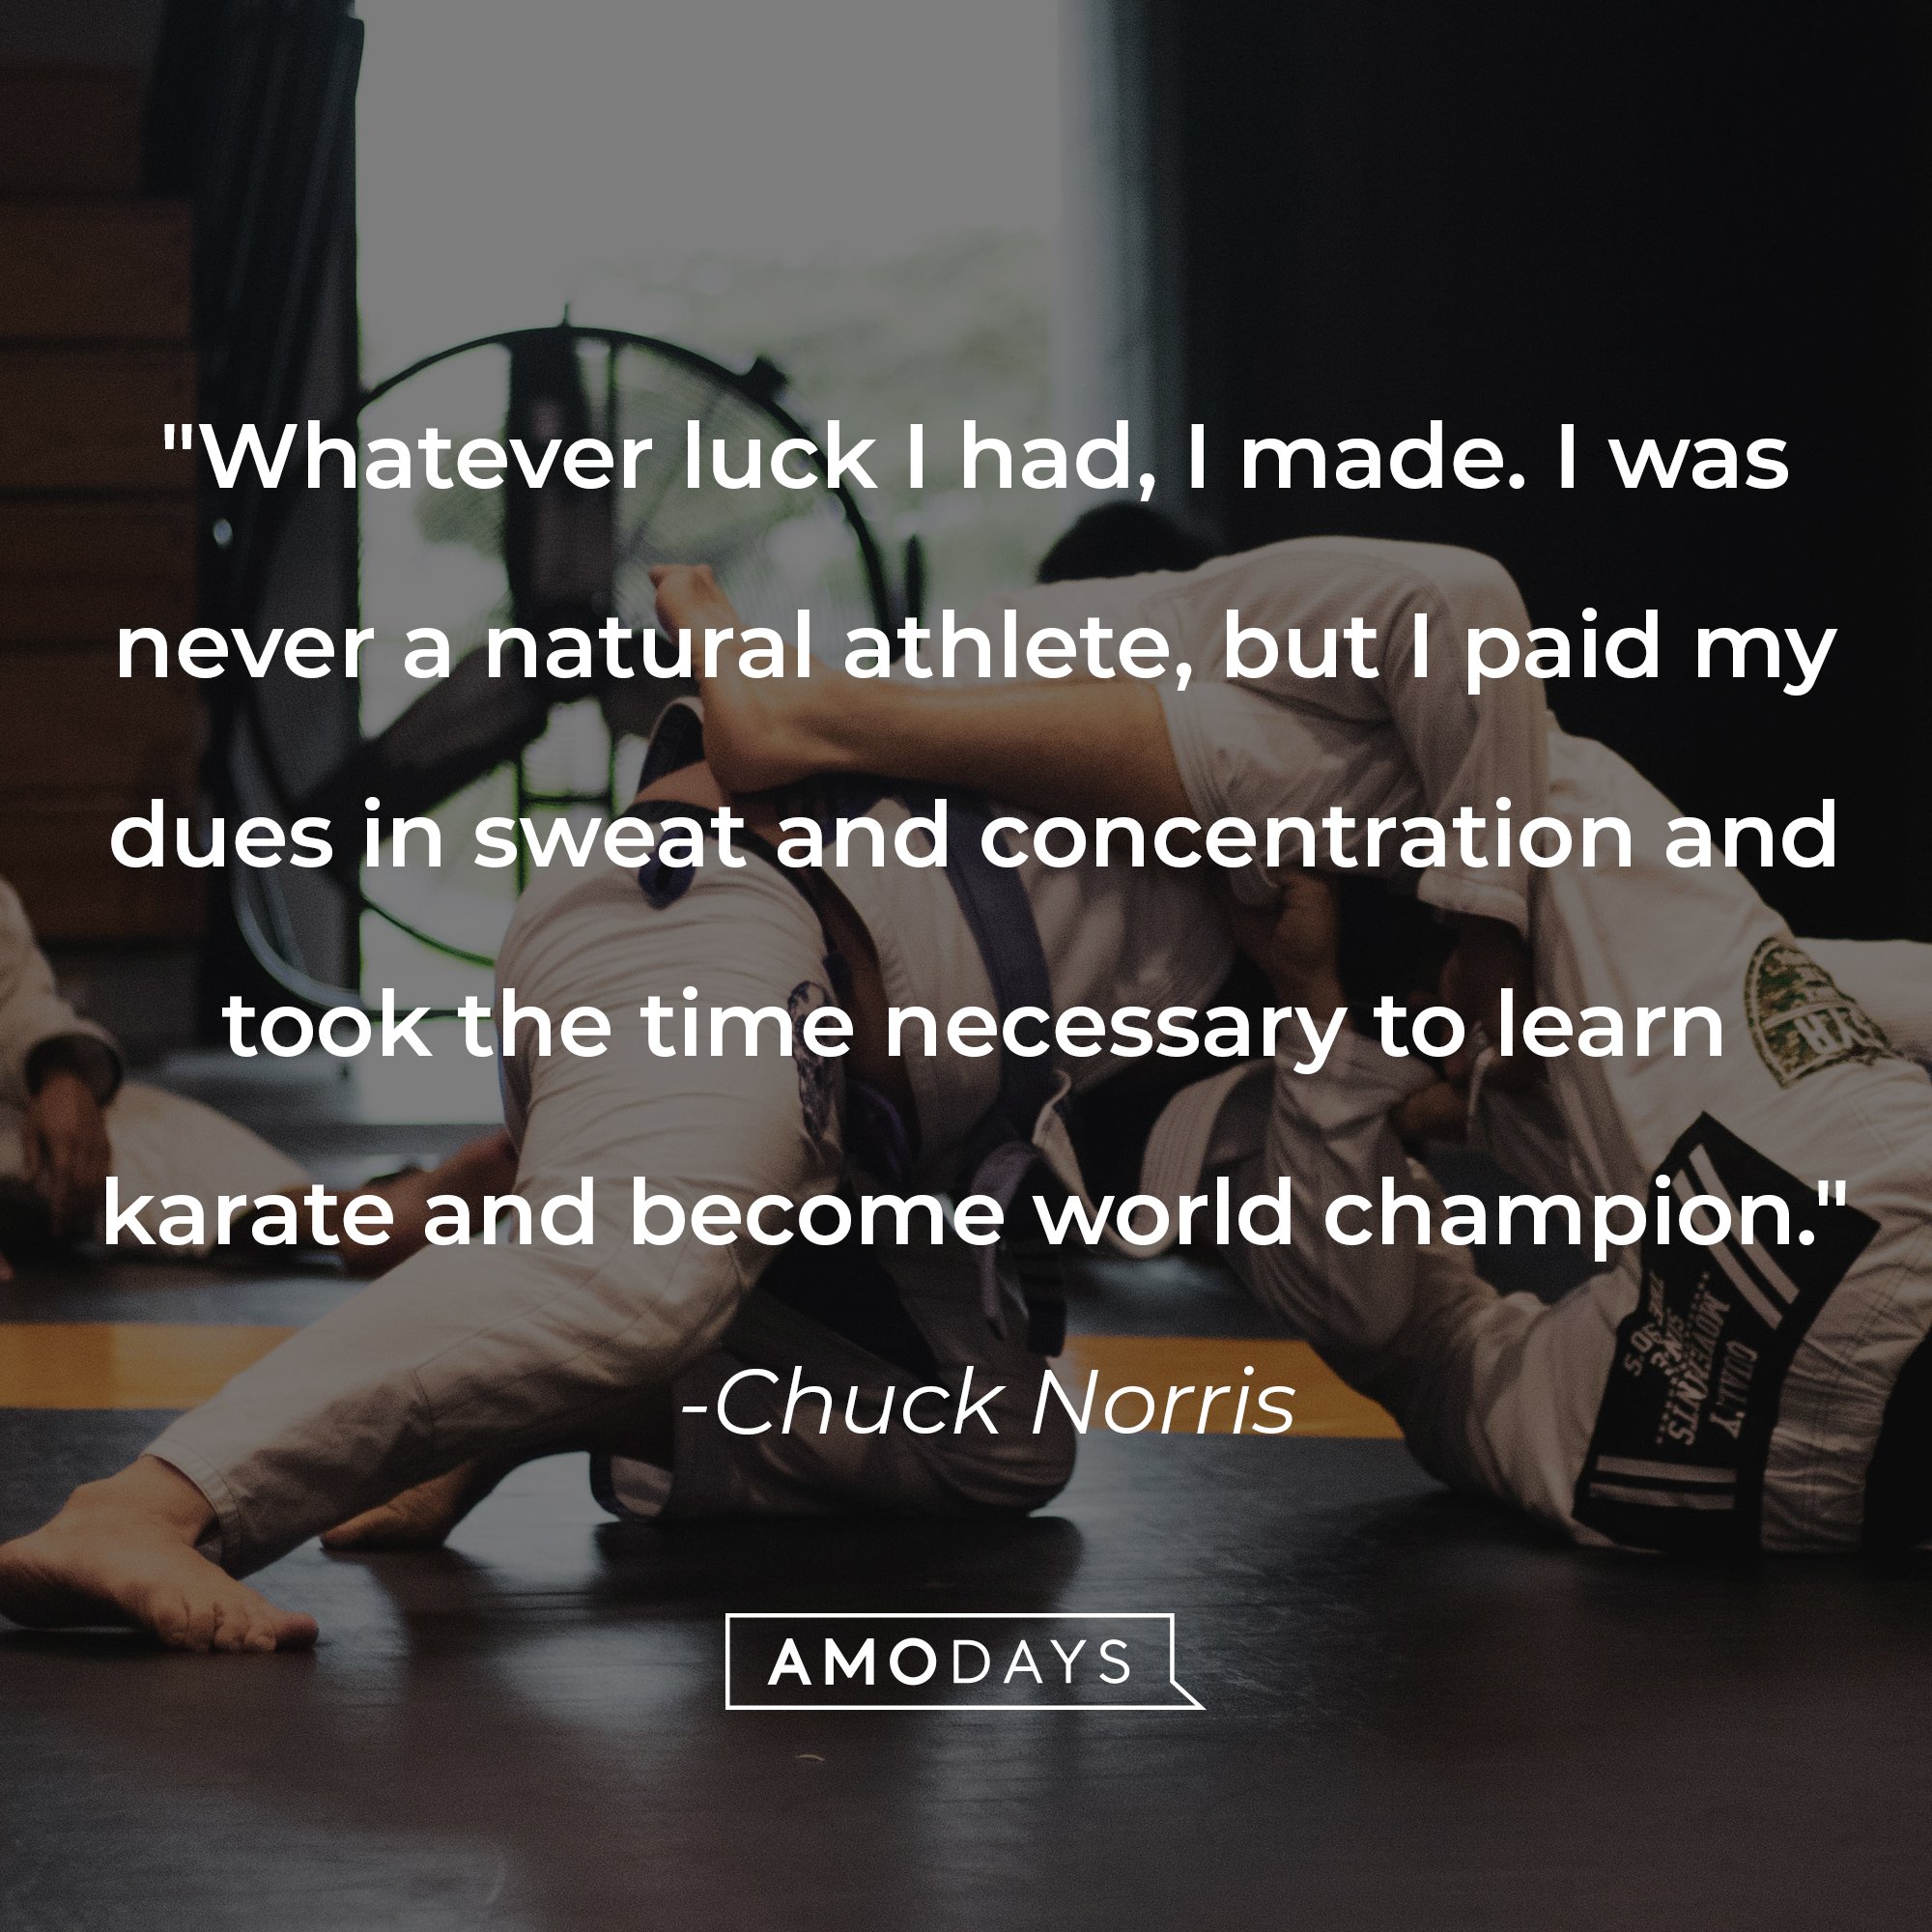 Chuck Norris’ quote: "Whatever luck I had, I made. I was never a natural athlete, but I paid my dues in sweat and concentration and took the time necessary to learn karate and become world champion." | Image: AmoDays   